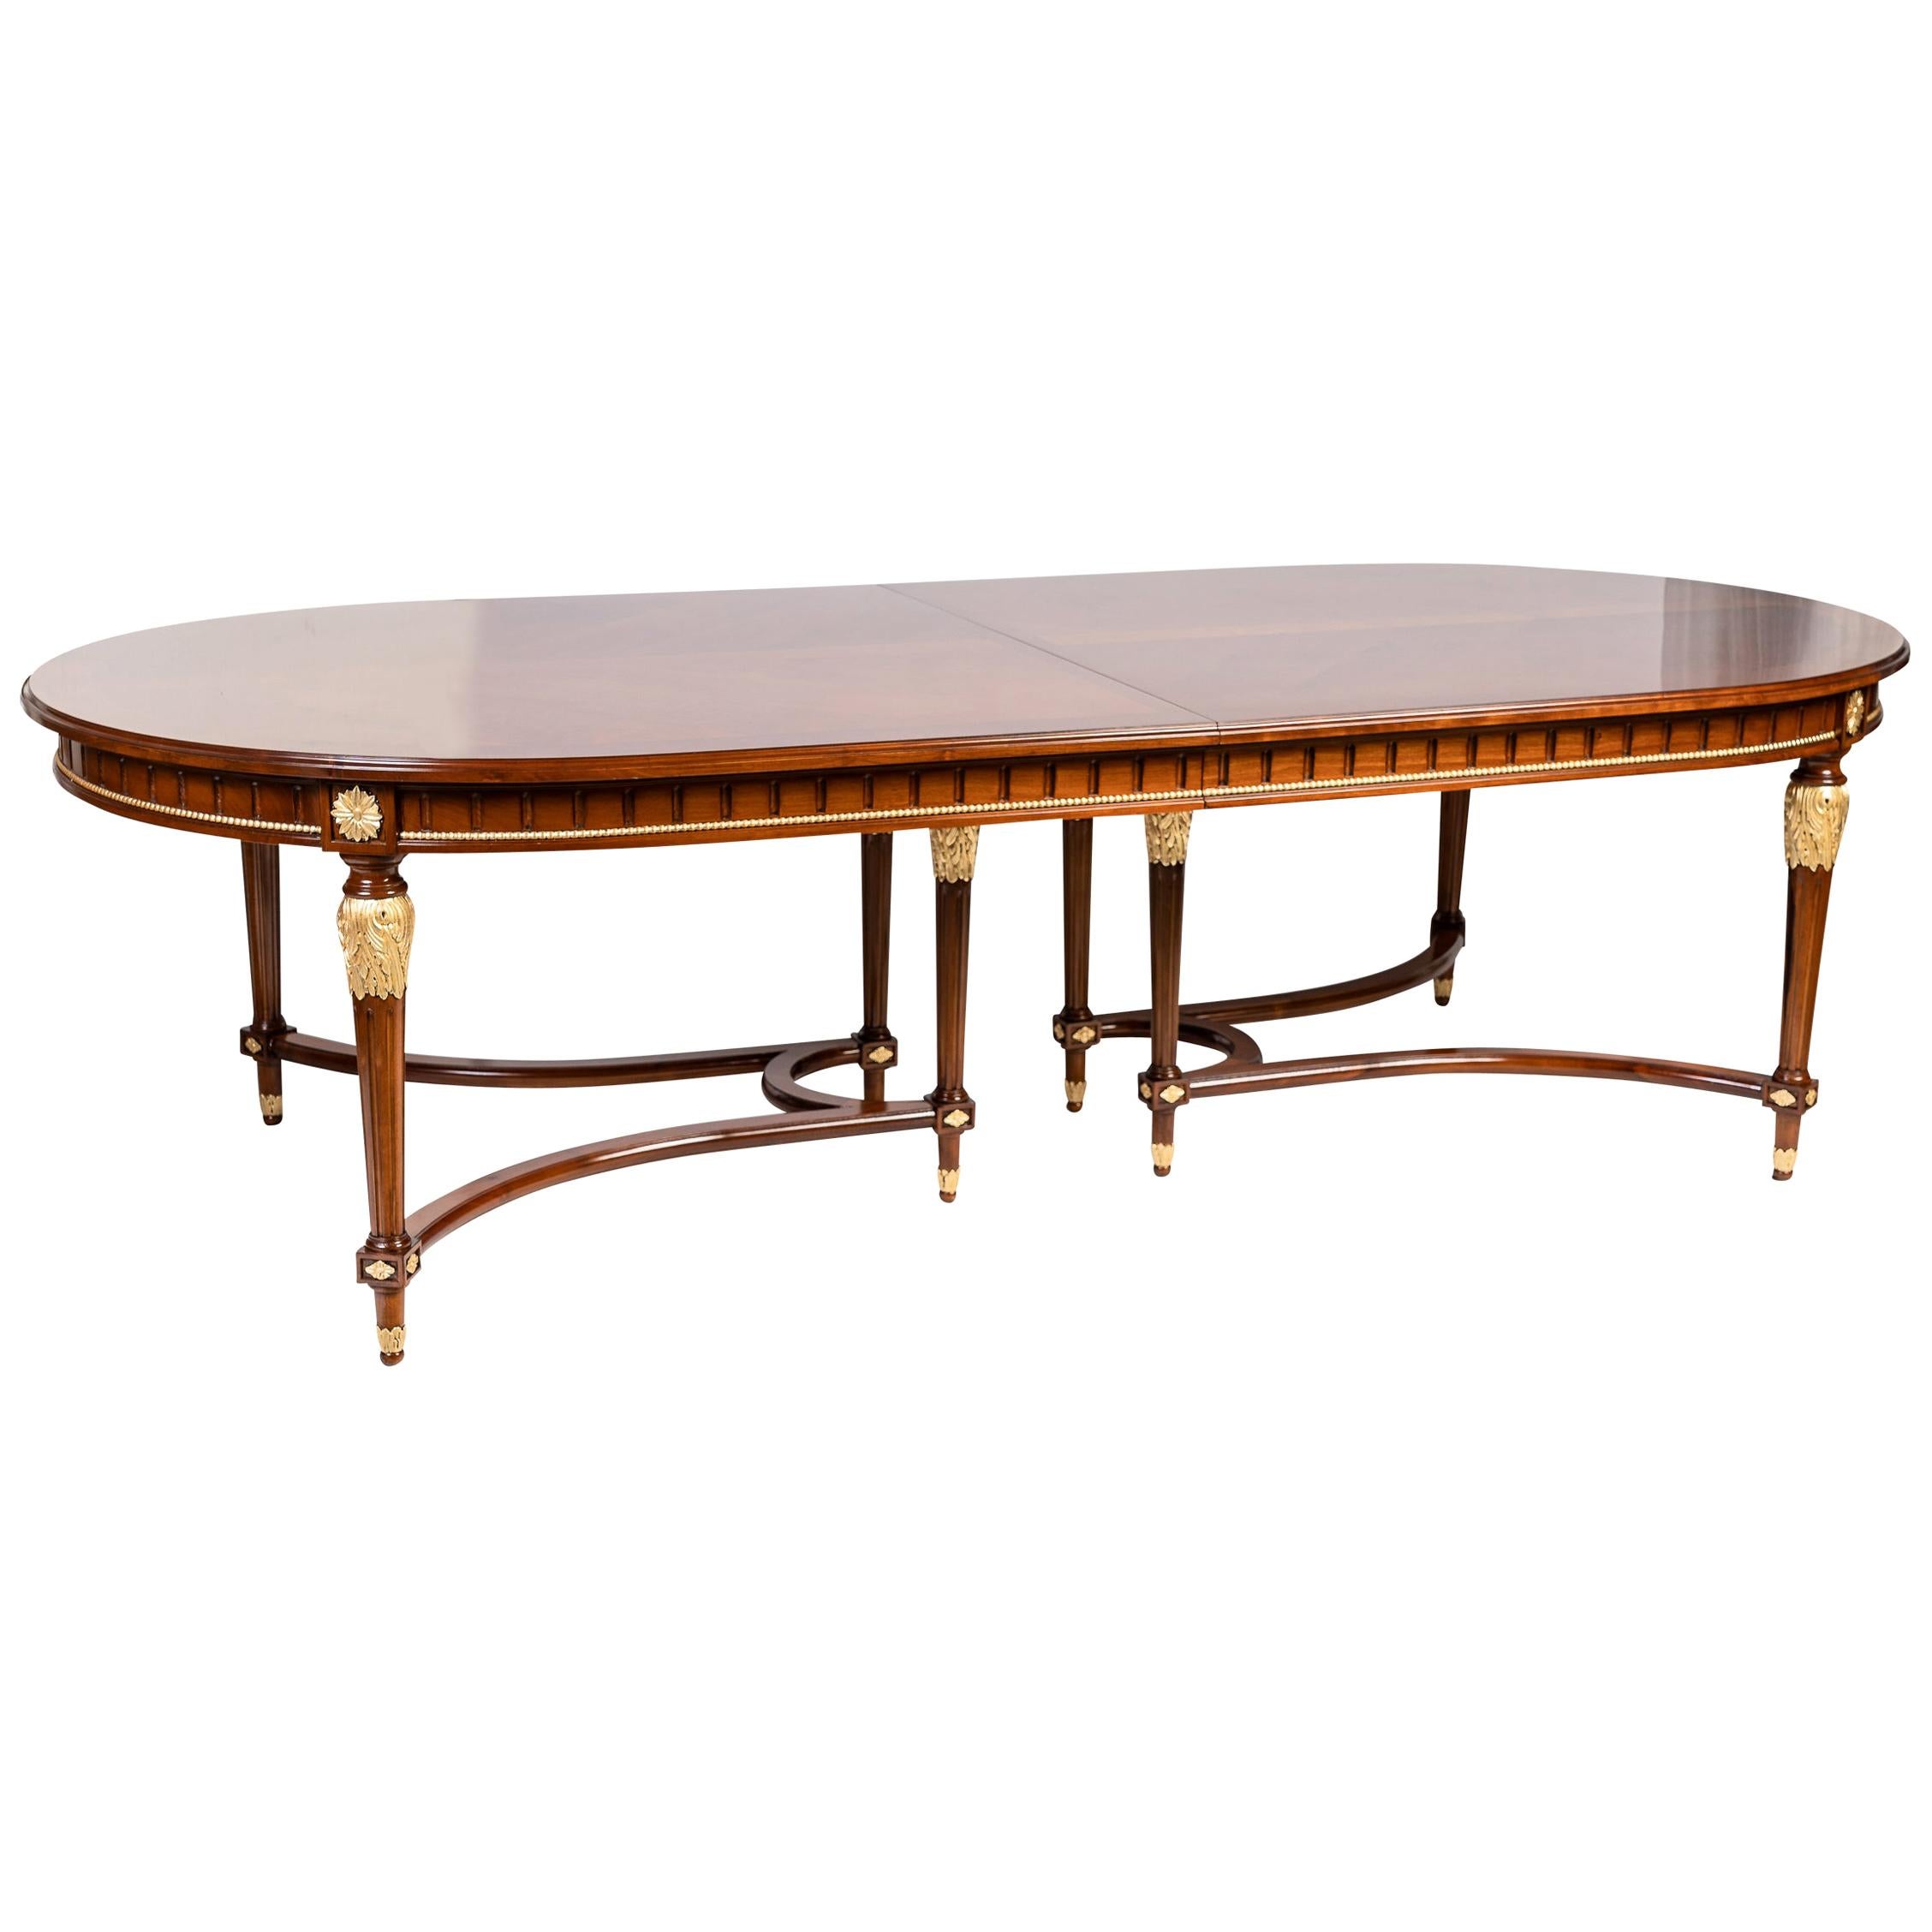 French 19th Century Louis XVI Style Cherry Dining Table with Two Extensions